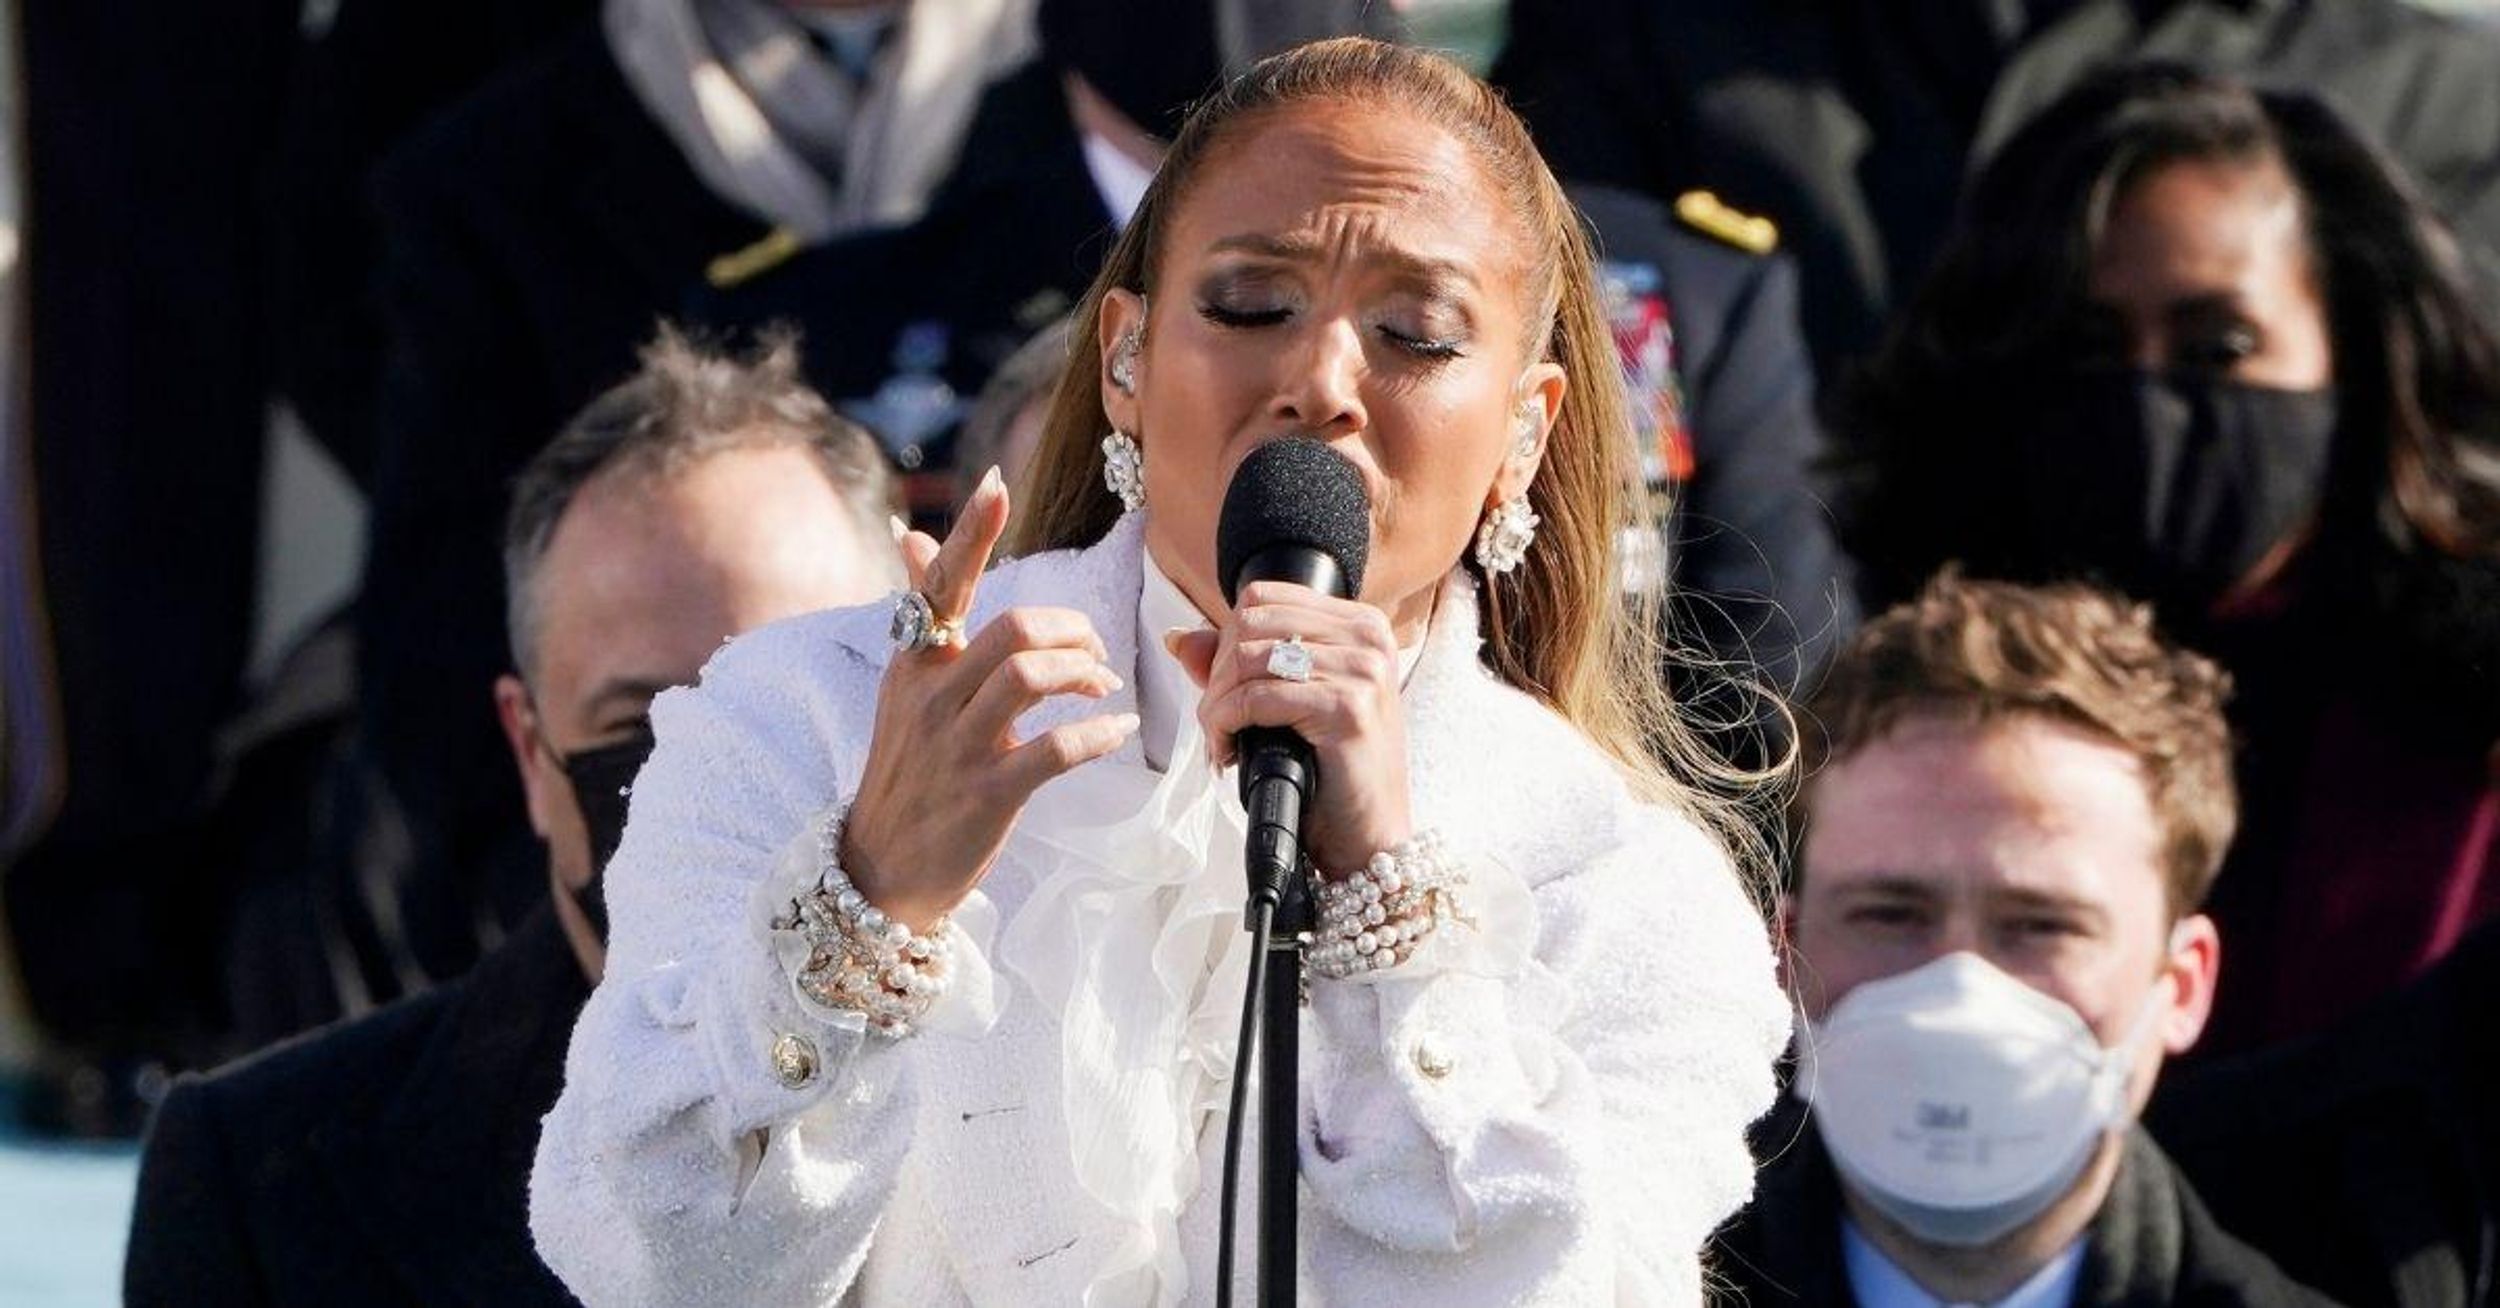 J.Lo Becomes Instant Legend After She Somehow Worked 'Let's Get Loud' Into Her Inauguration Performance